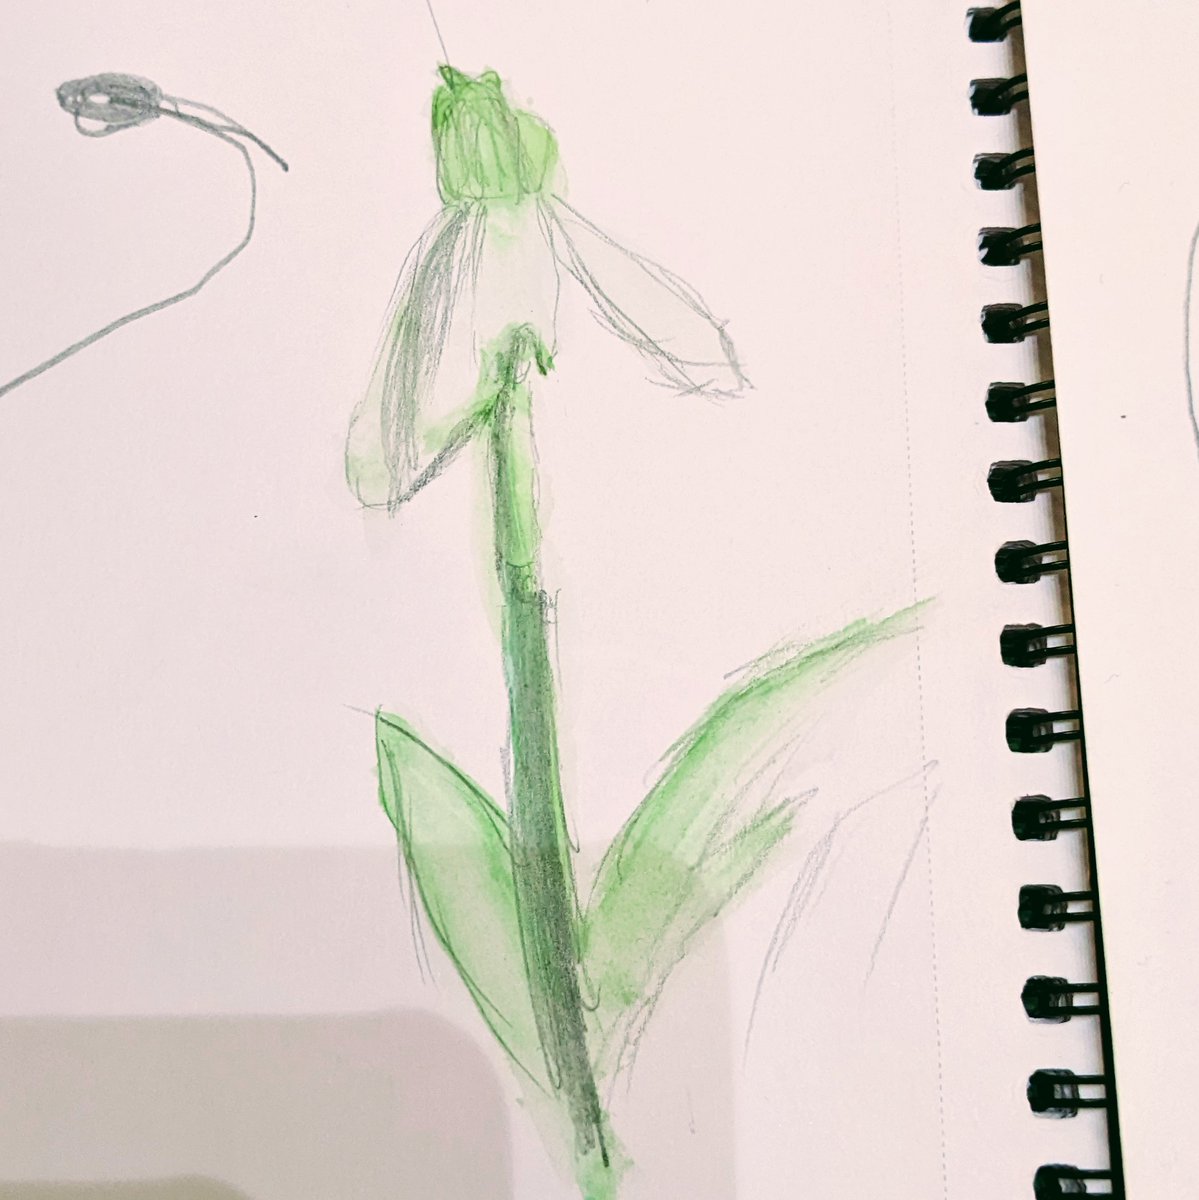 Last week we celebrated spring and the return of flowers. We looked at the poem 'flowers' did some creative writing, line drawings and a bit of painting. @boltongpfed @WoodlandTrust #snowdrops #artforwellbeing #greenarts #mentalhea